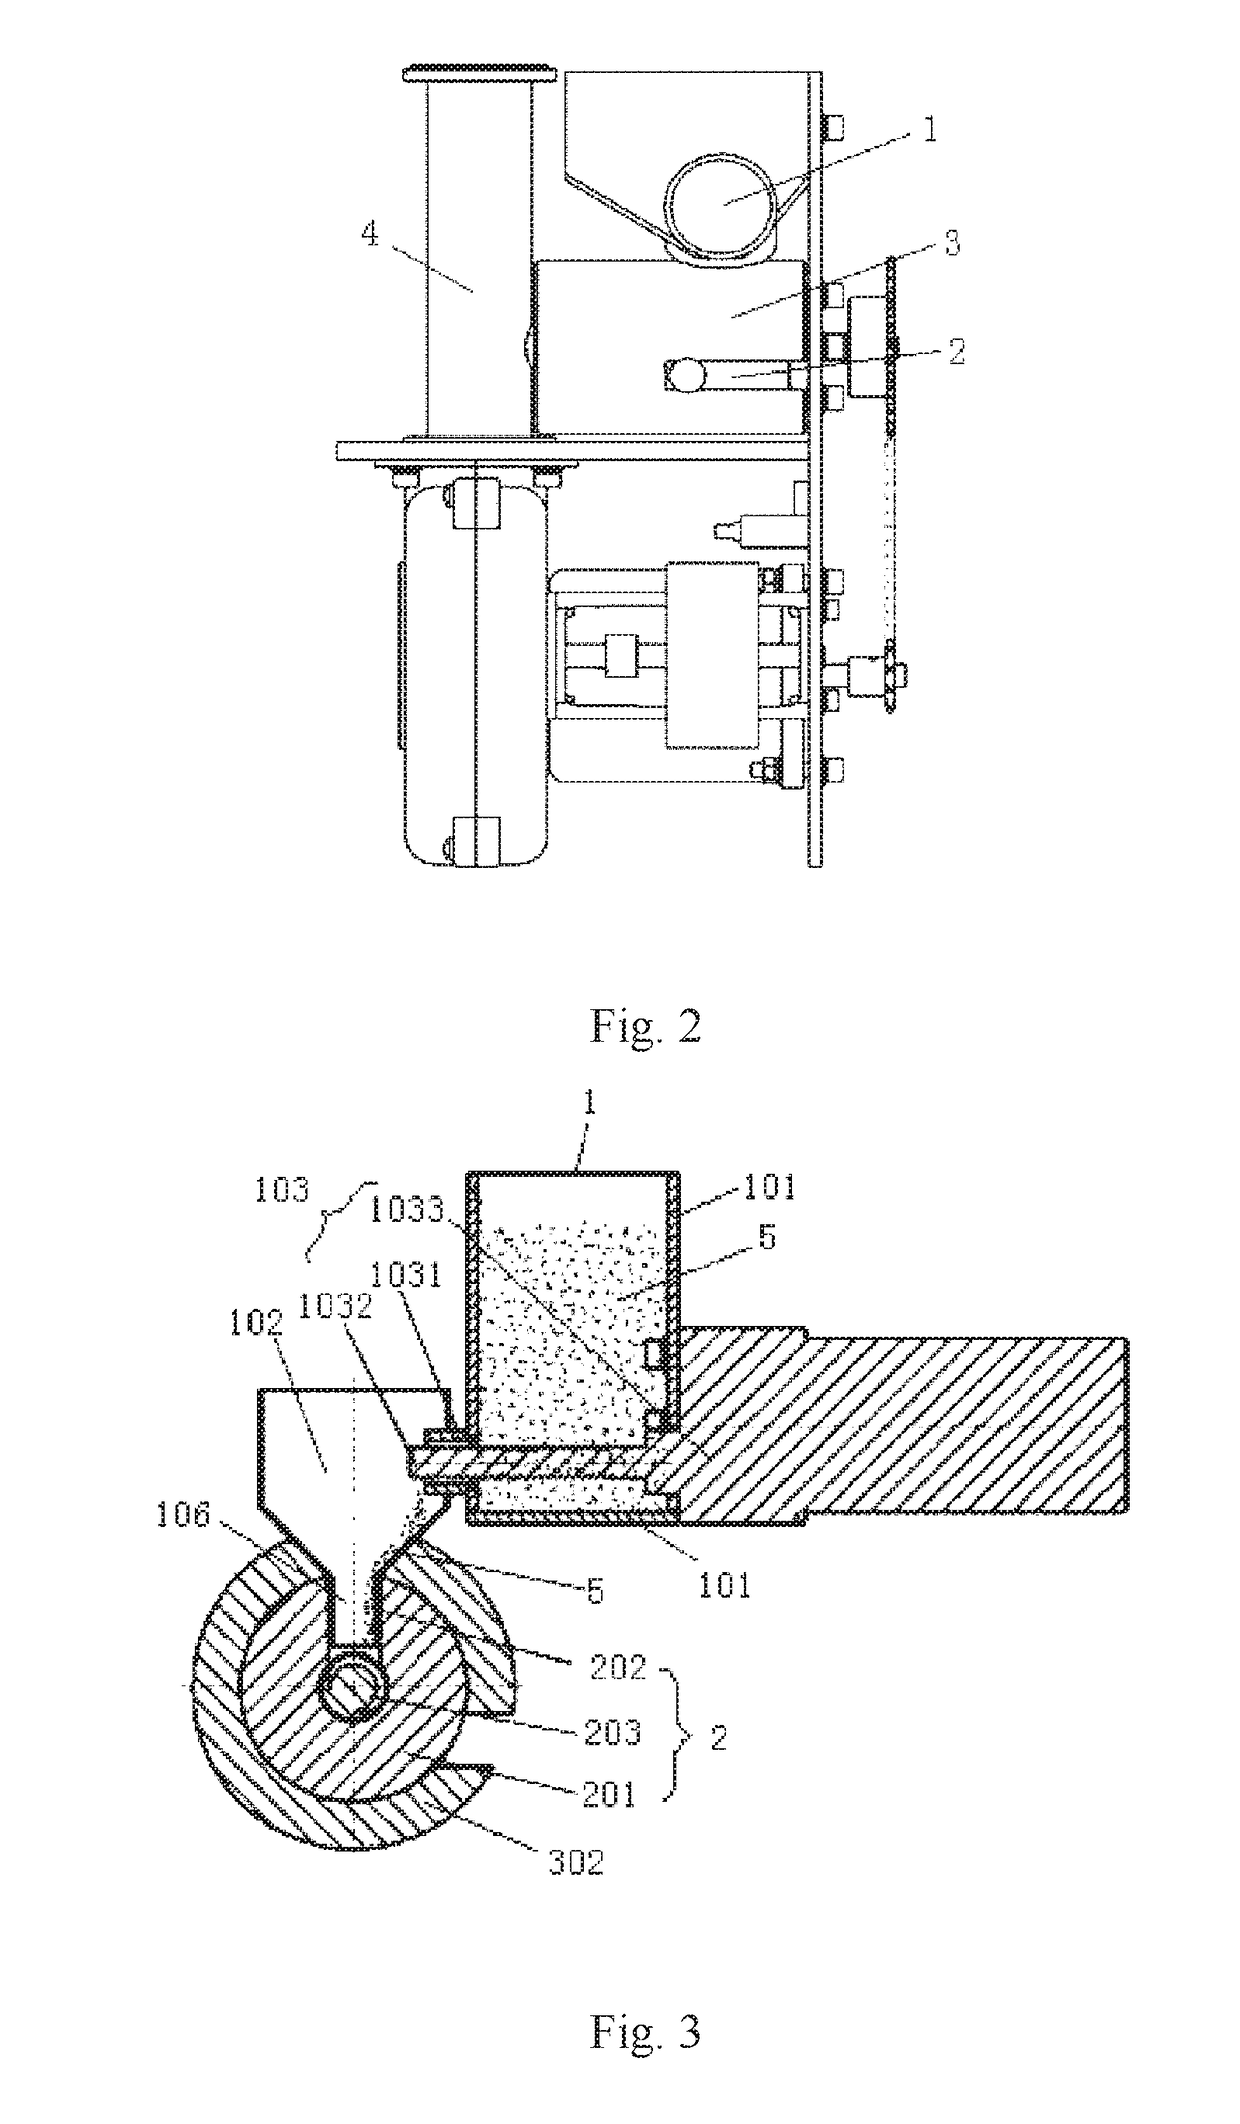 Cold firework spurting apparatus